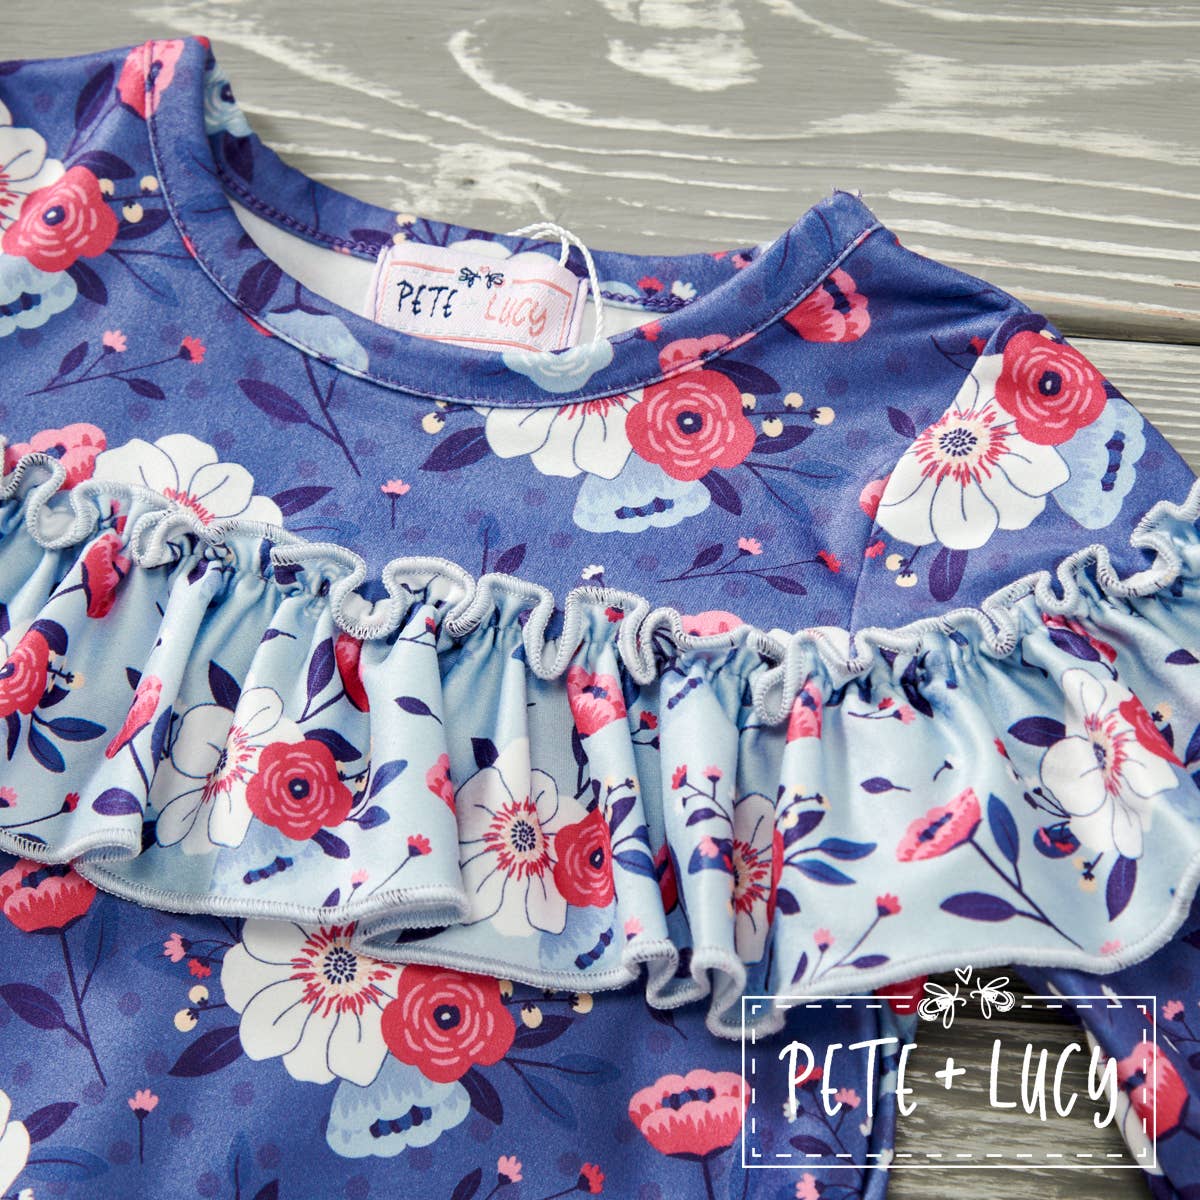 PETE + LUCY Country Denim Blue Floral Ruffle Baby Toddler Romper